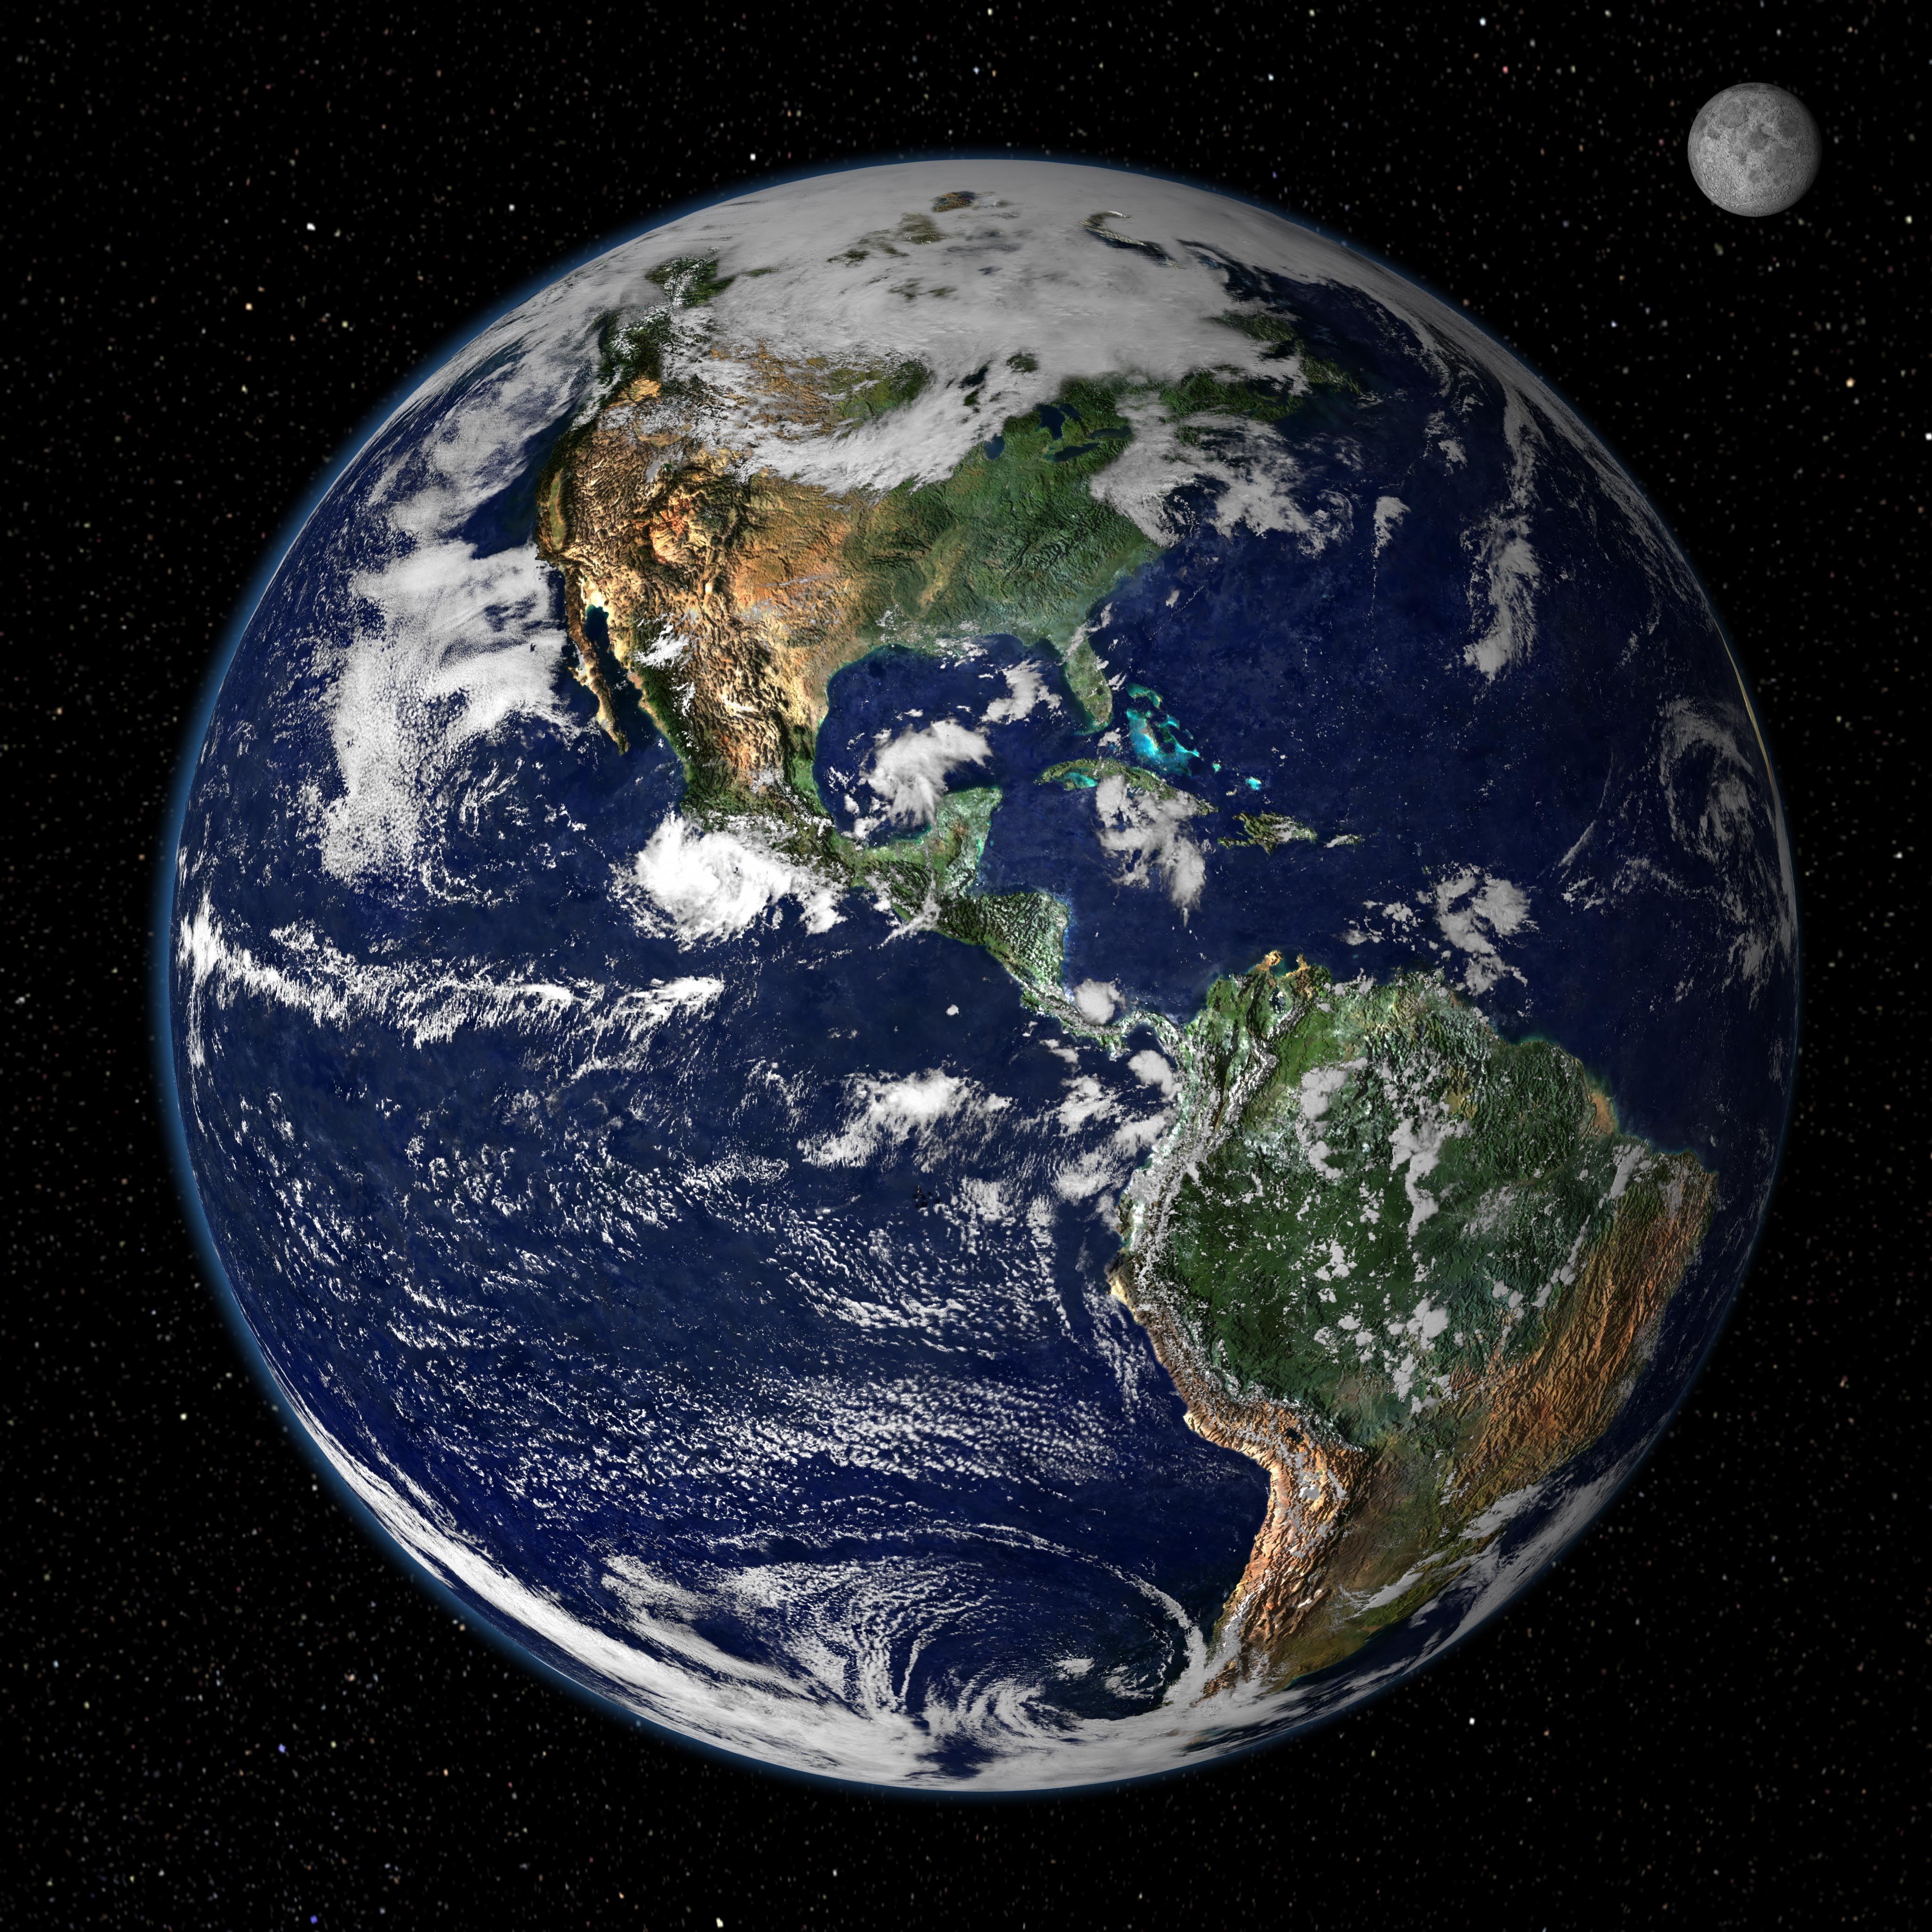 Image Of Earth From Space